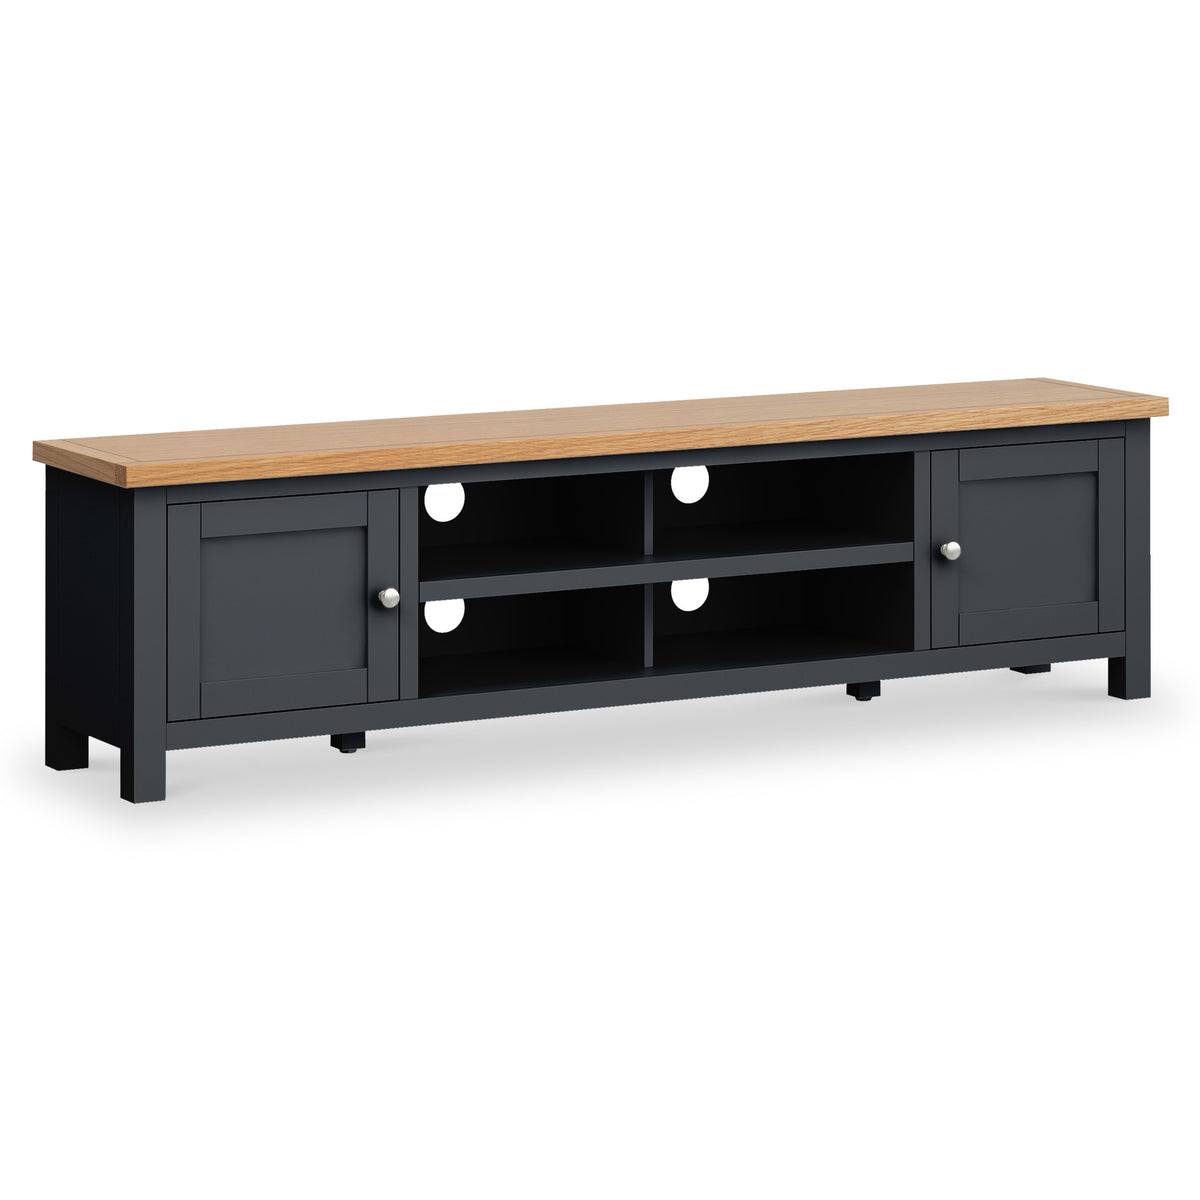 Farrow Charcoal 180cm Extra Wide TV Stand from Roseland furniture